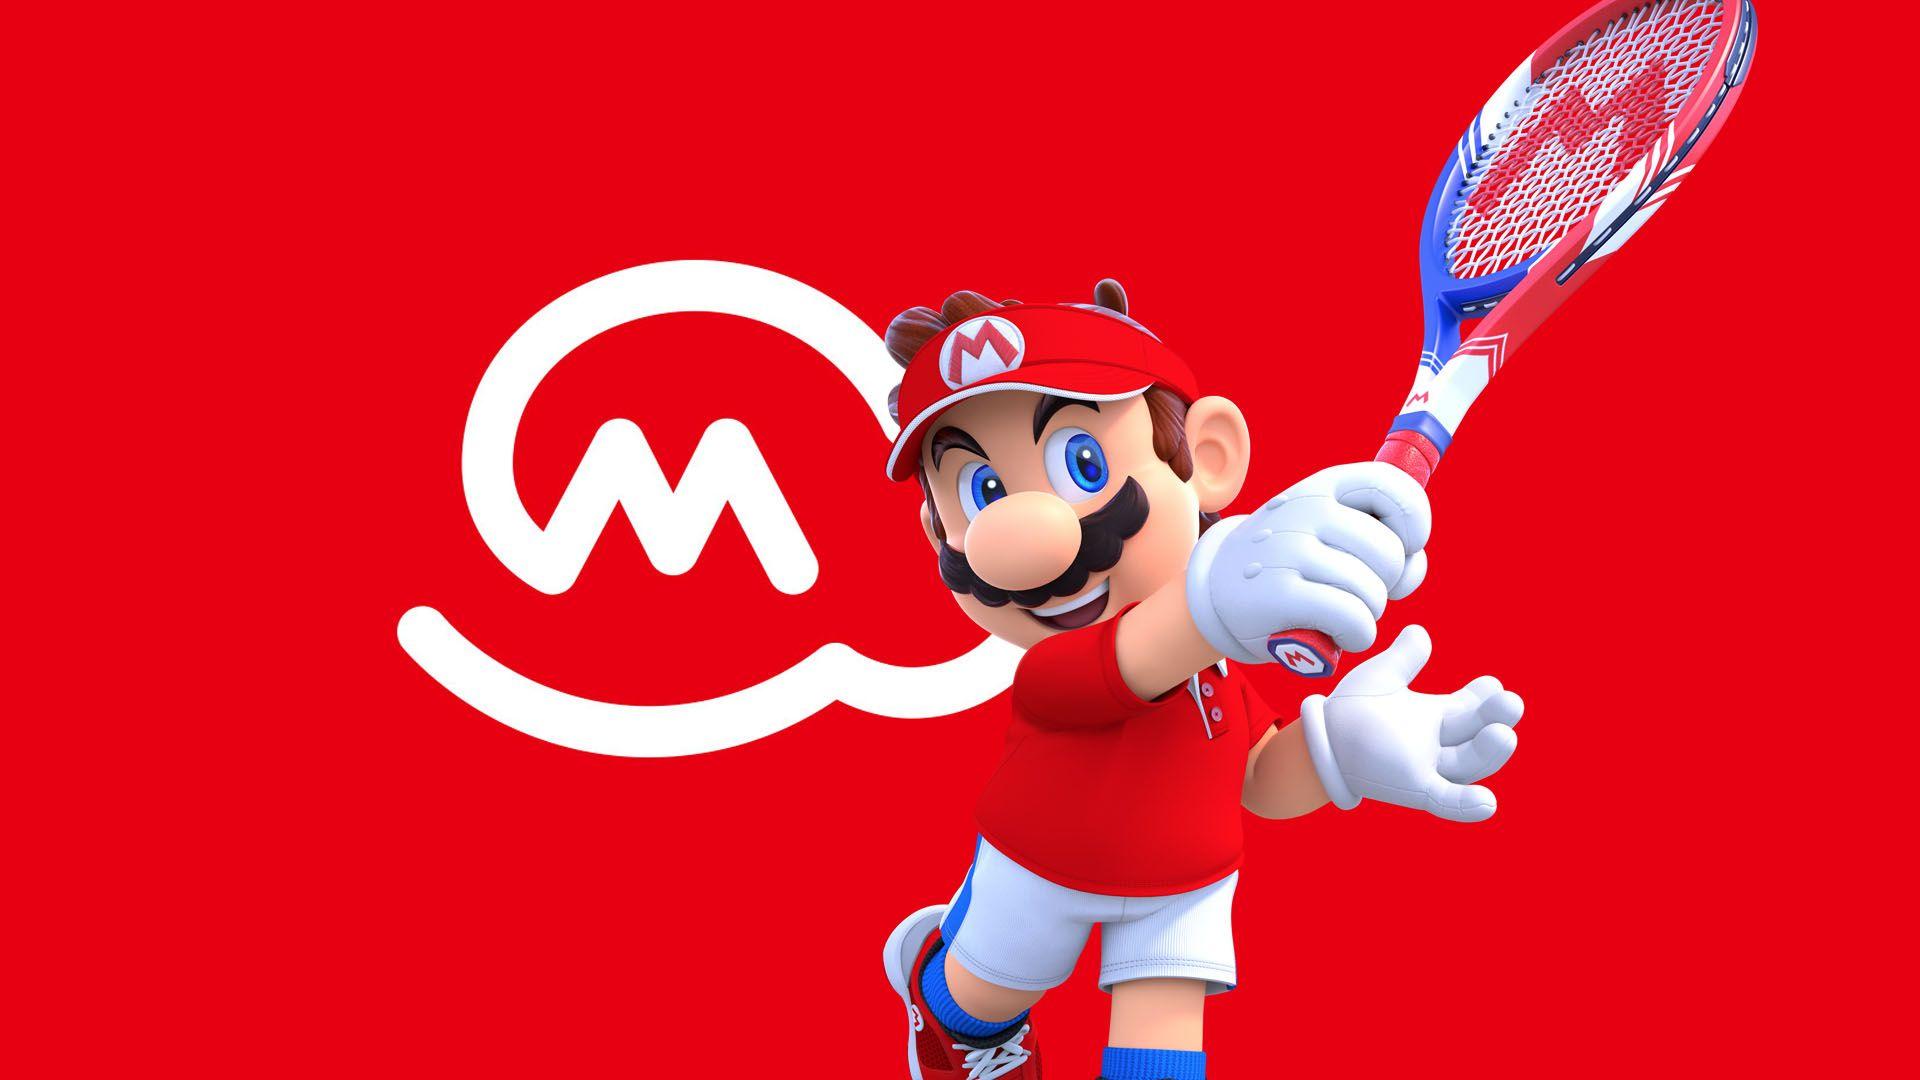 Digital Mario Tennis Aces orders will net you double the My Nintendo